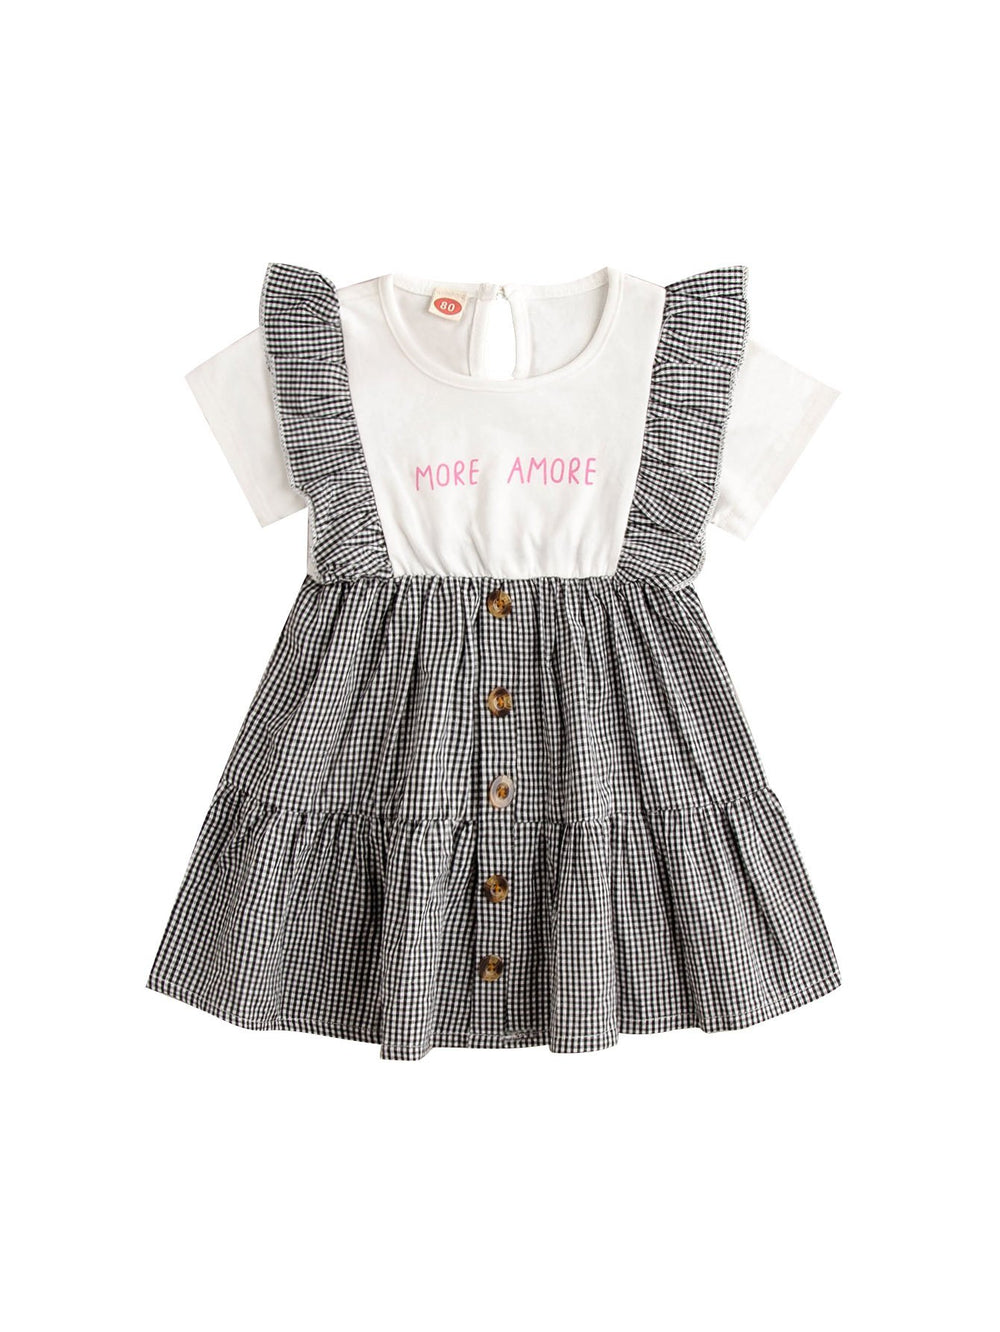 Baby Girl Fake Two Piece More Amore Plaid Dress Wholesale 89642720